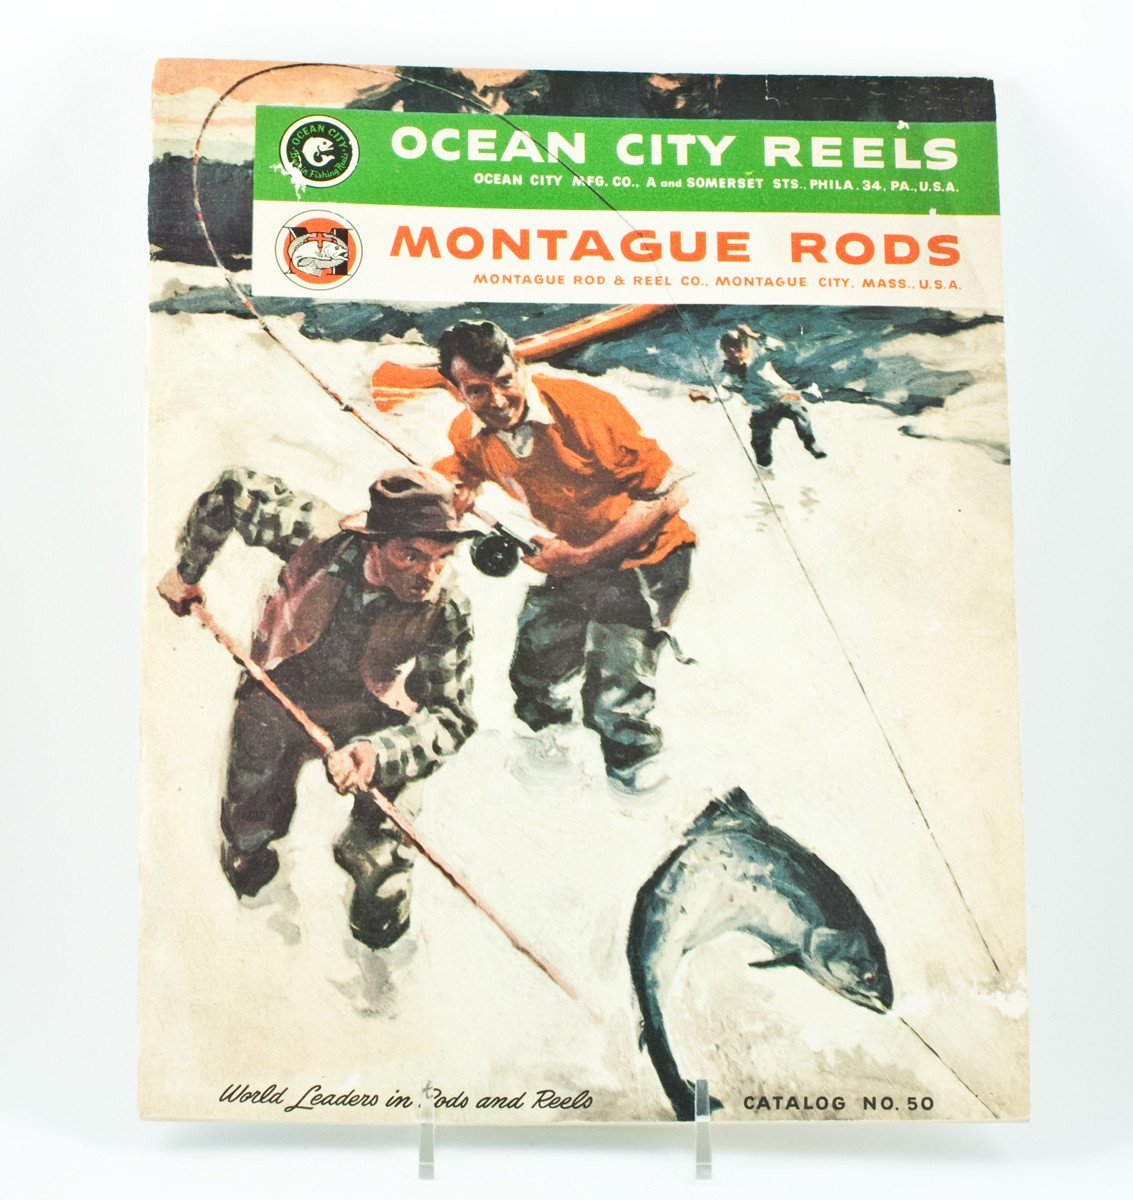 Ocean City Reels / Montague Rods Fishing Tackle Catalog 1950